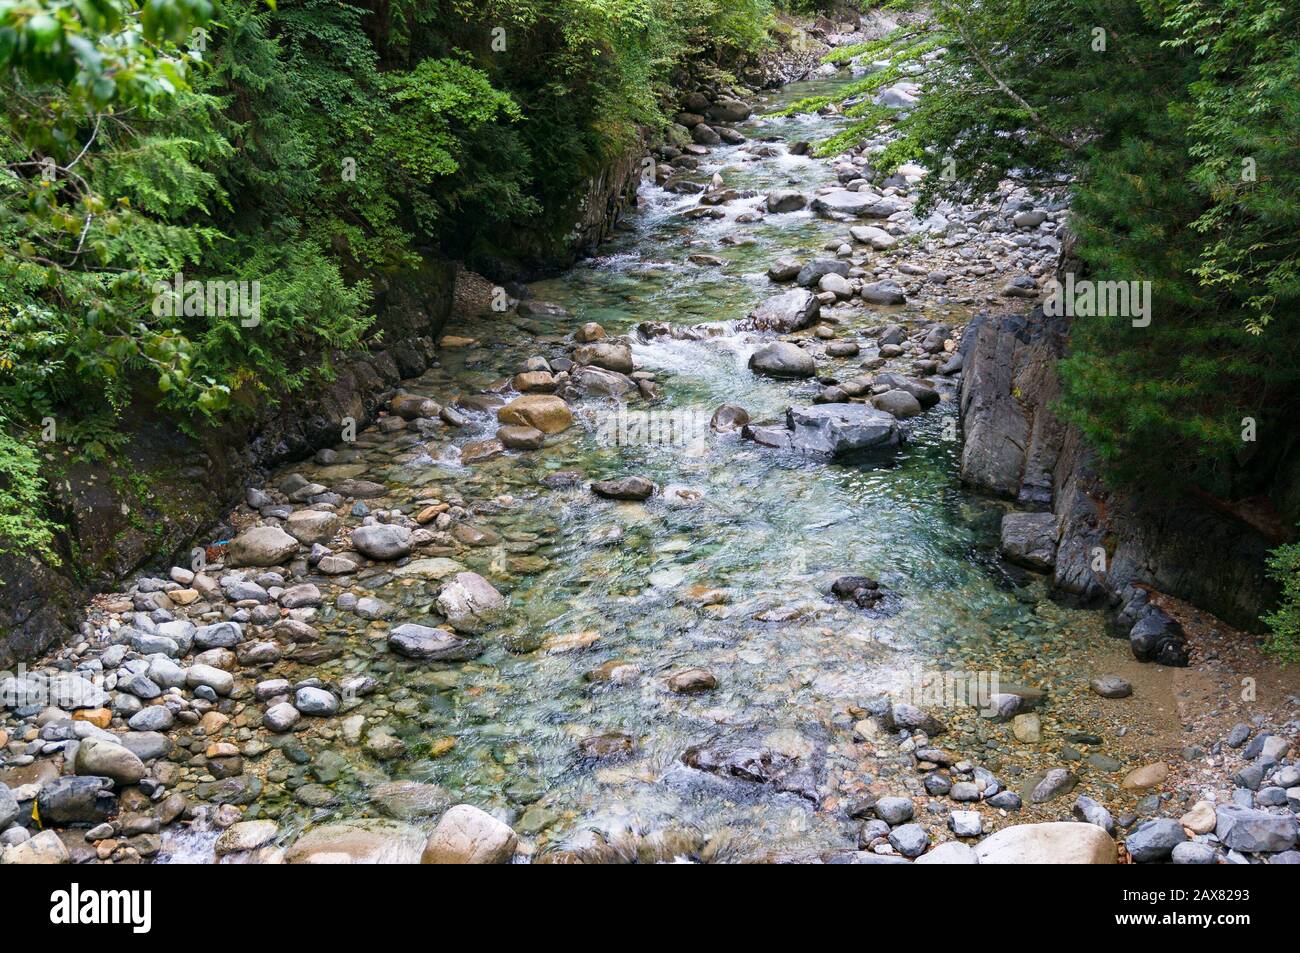 Forest landscape with rapid shallow stream with crystal clear waters. Japanese nature background. Ookuwa, Nagano prefecture, Japan Stock Photo